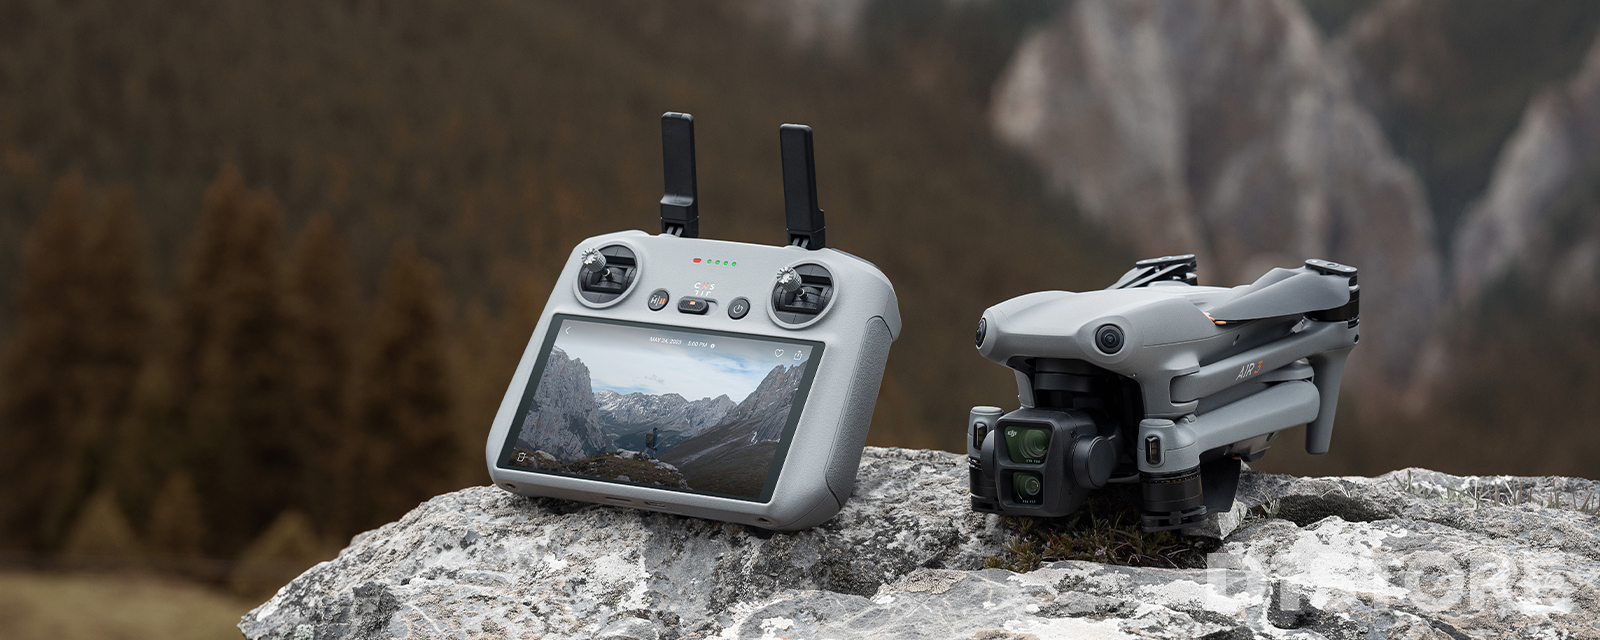 DJI Air 3 - Reliable New Remote | Best Price Guarantee at D1 Store Australia